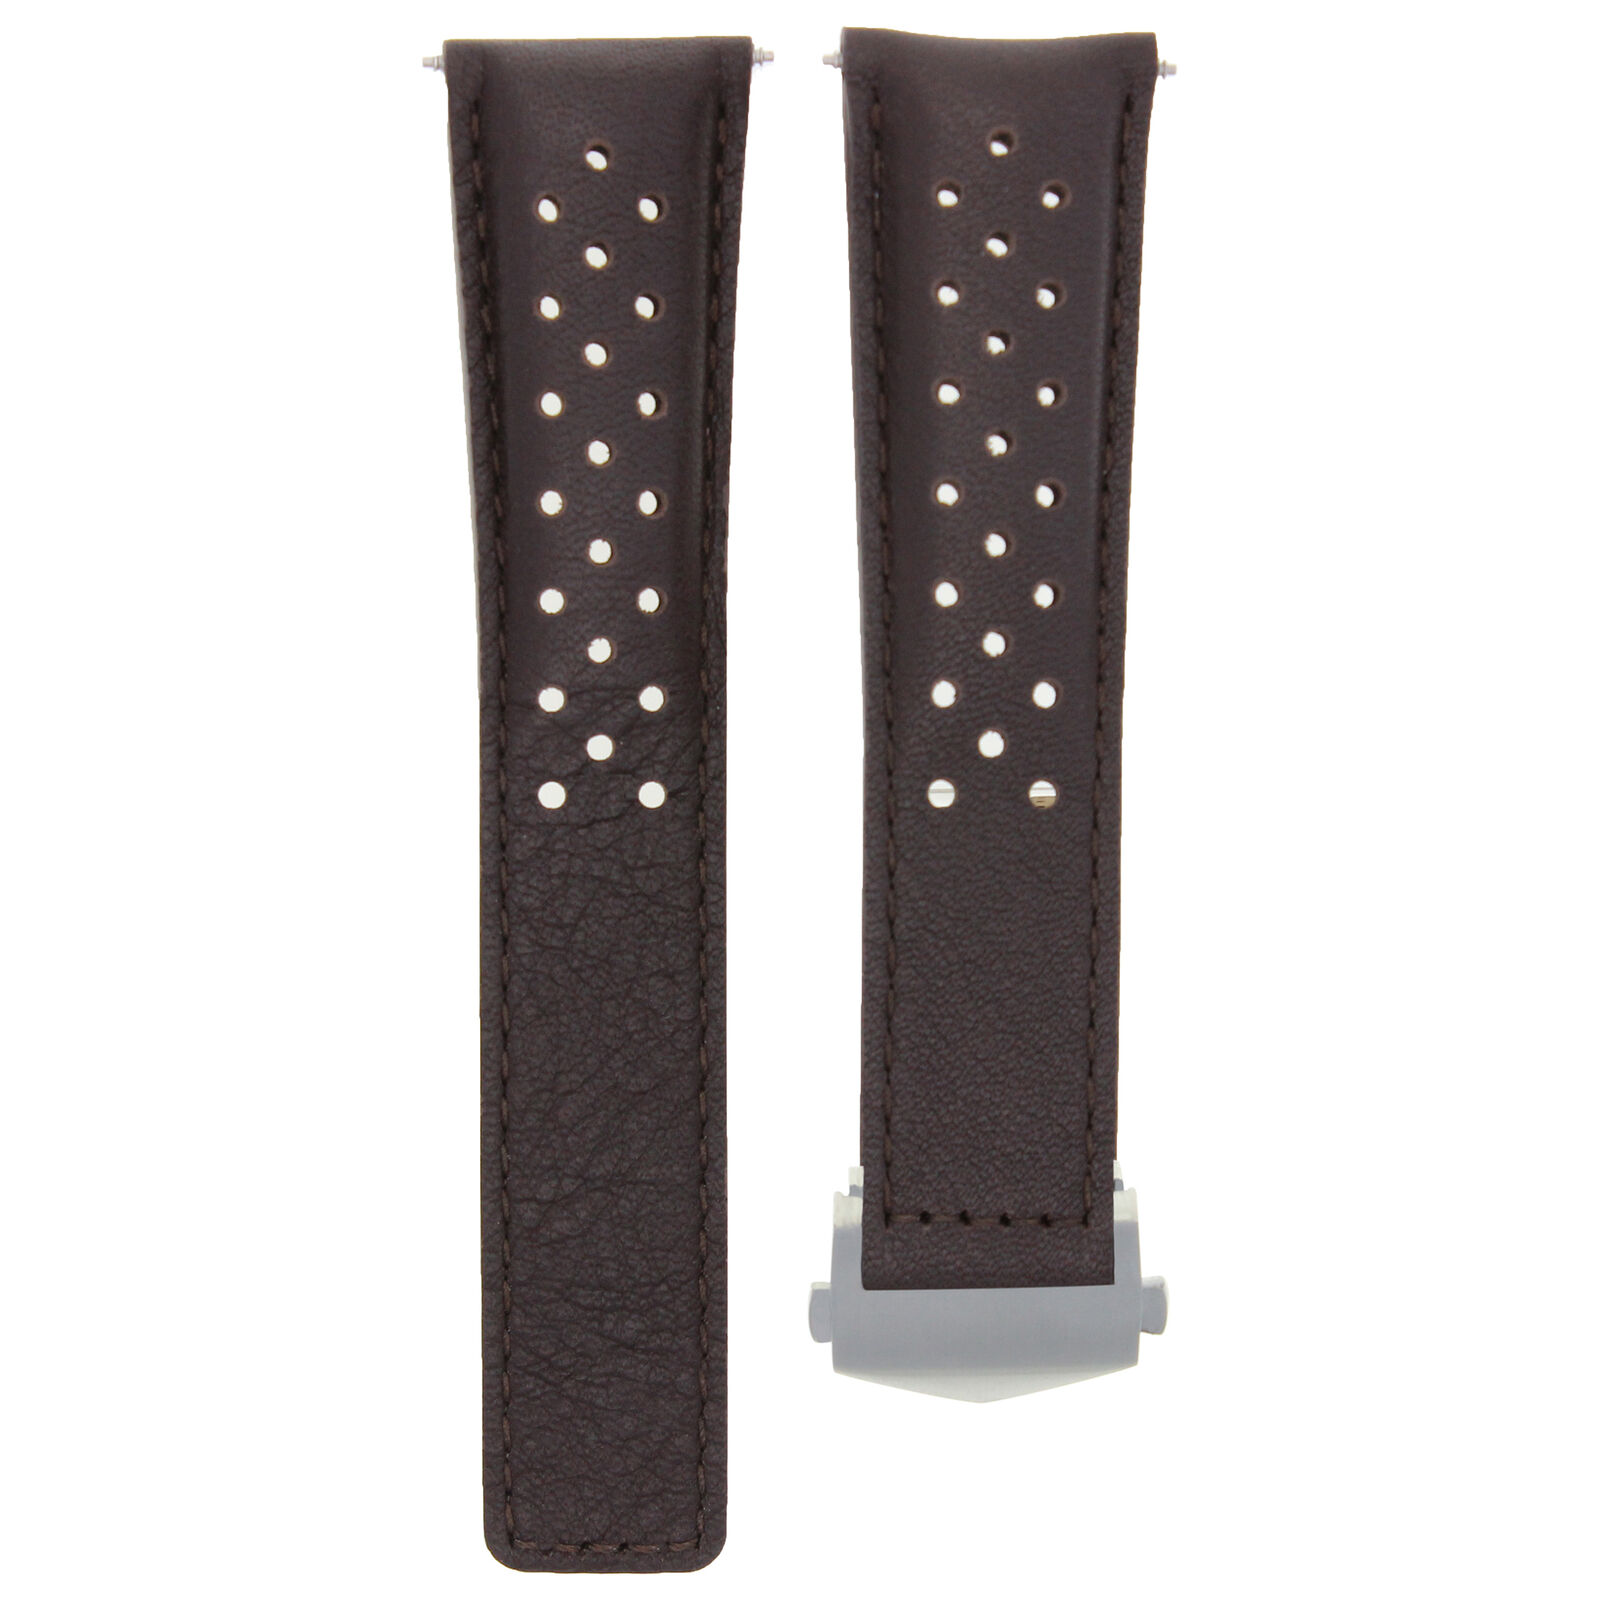 LEATHER WATCH BAND STRAP CLASP 22MM FOR TAG HEUER MONACO CARRERA BROWN PERFORAT